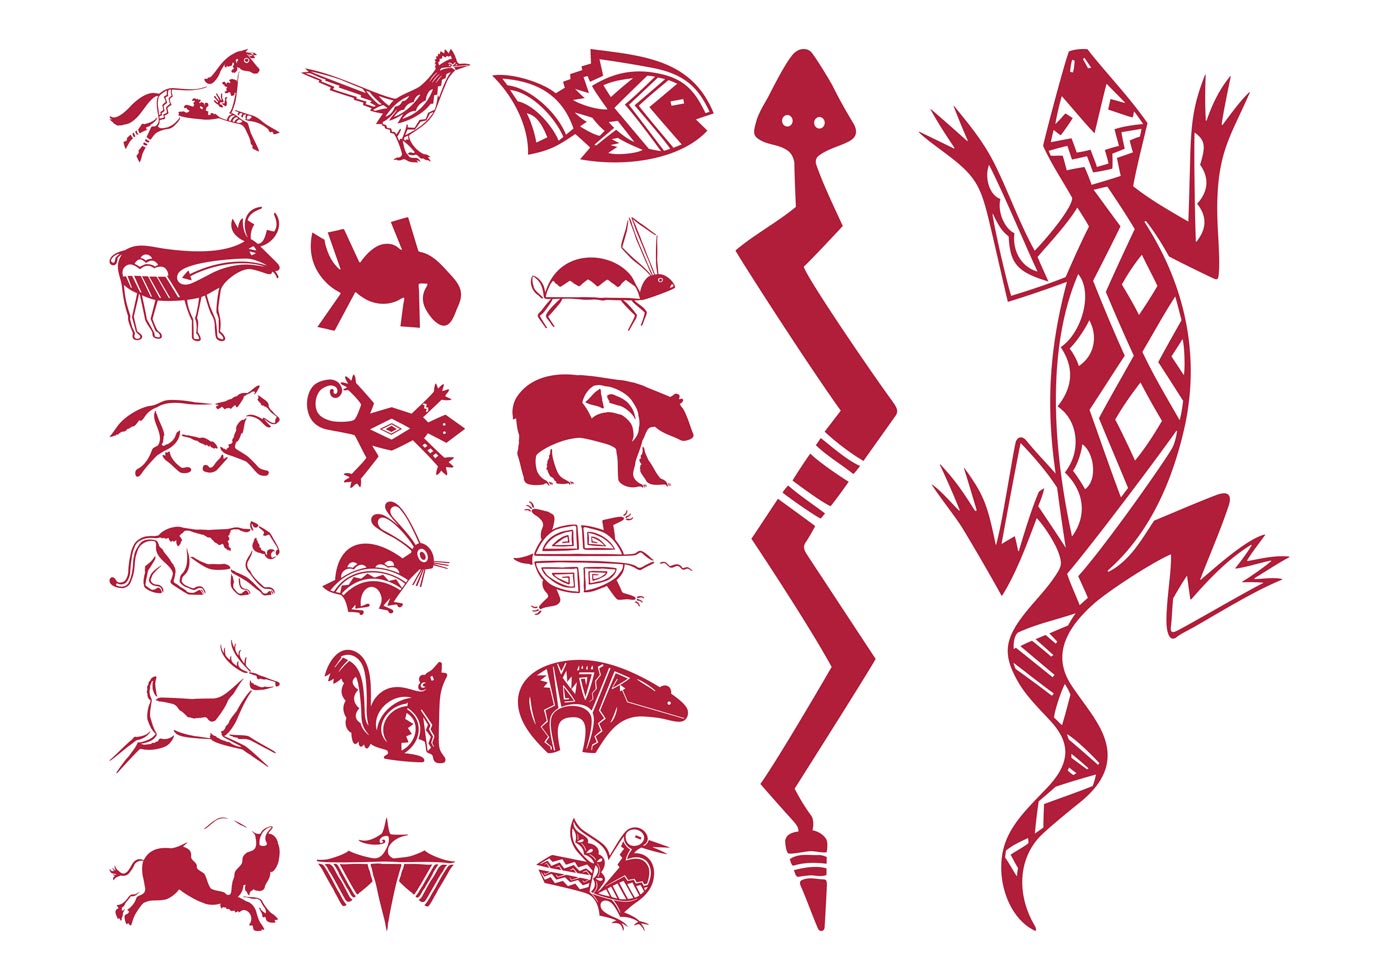 Native American Designs - Download Free Vector Art, Stock Graphics & Images